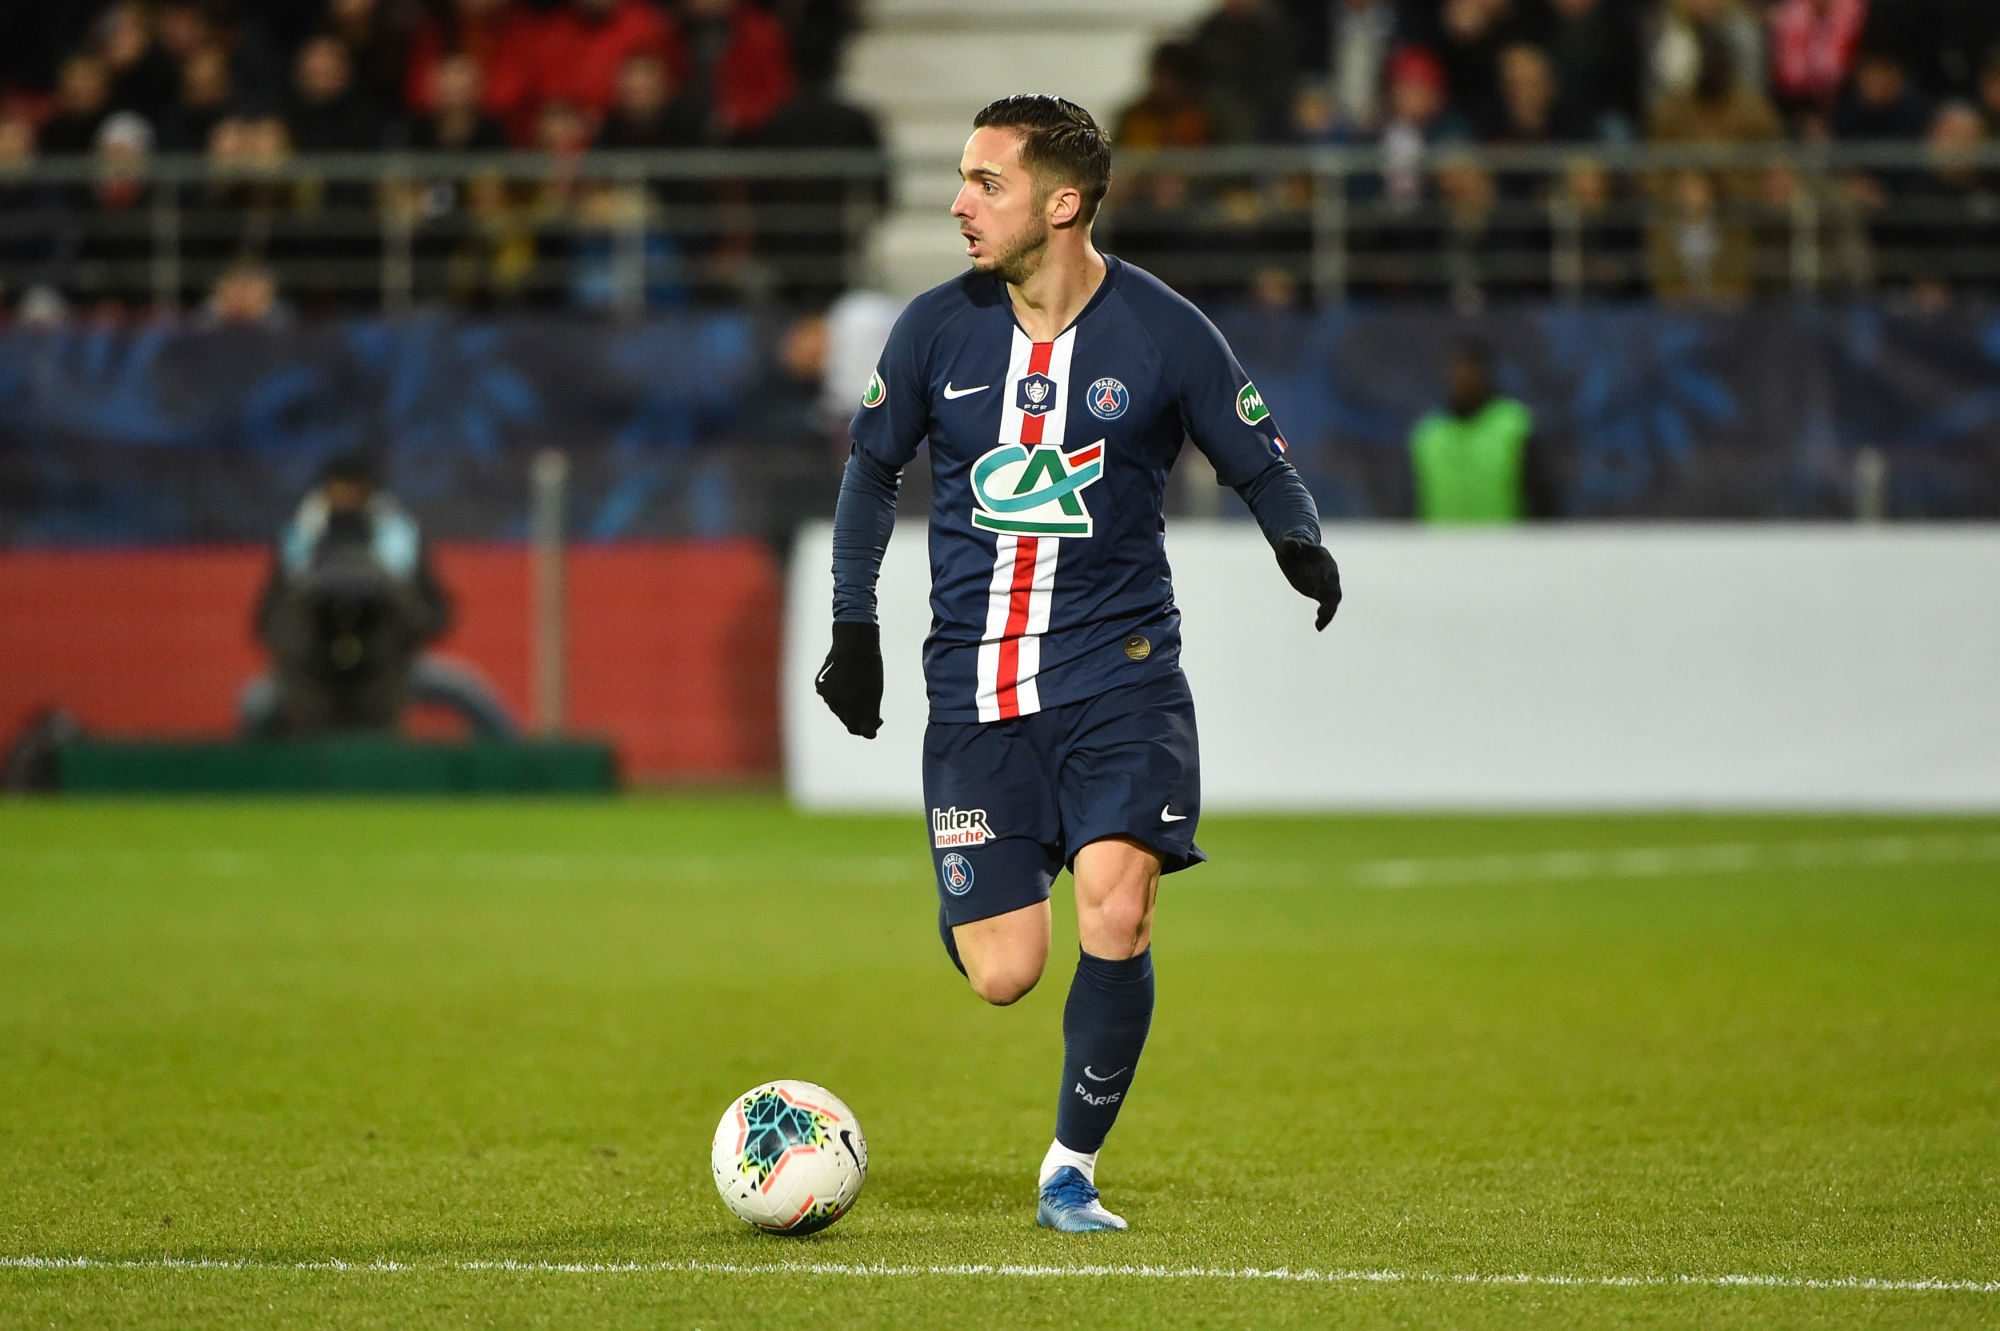 Pablo SARABIA - PSG (Photo by Vincent Poyer/Icon Sport)